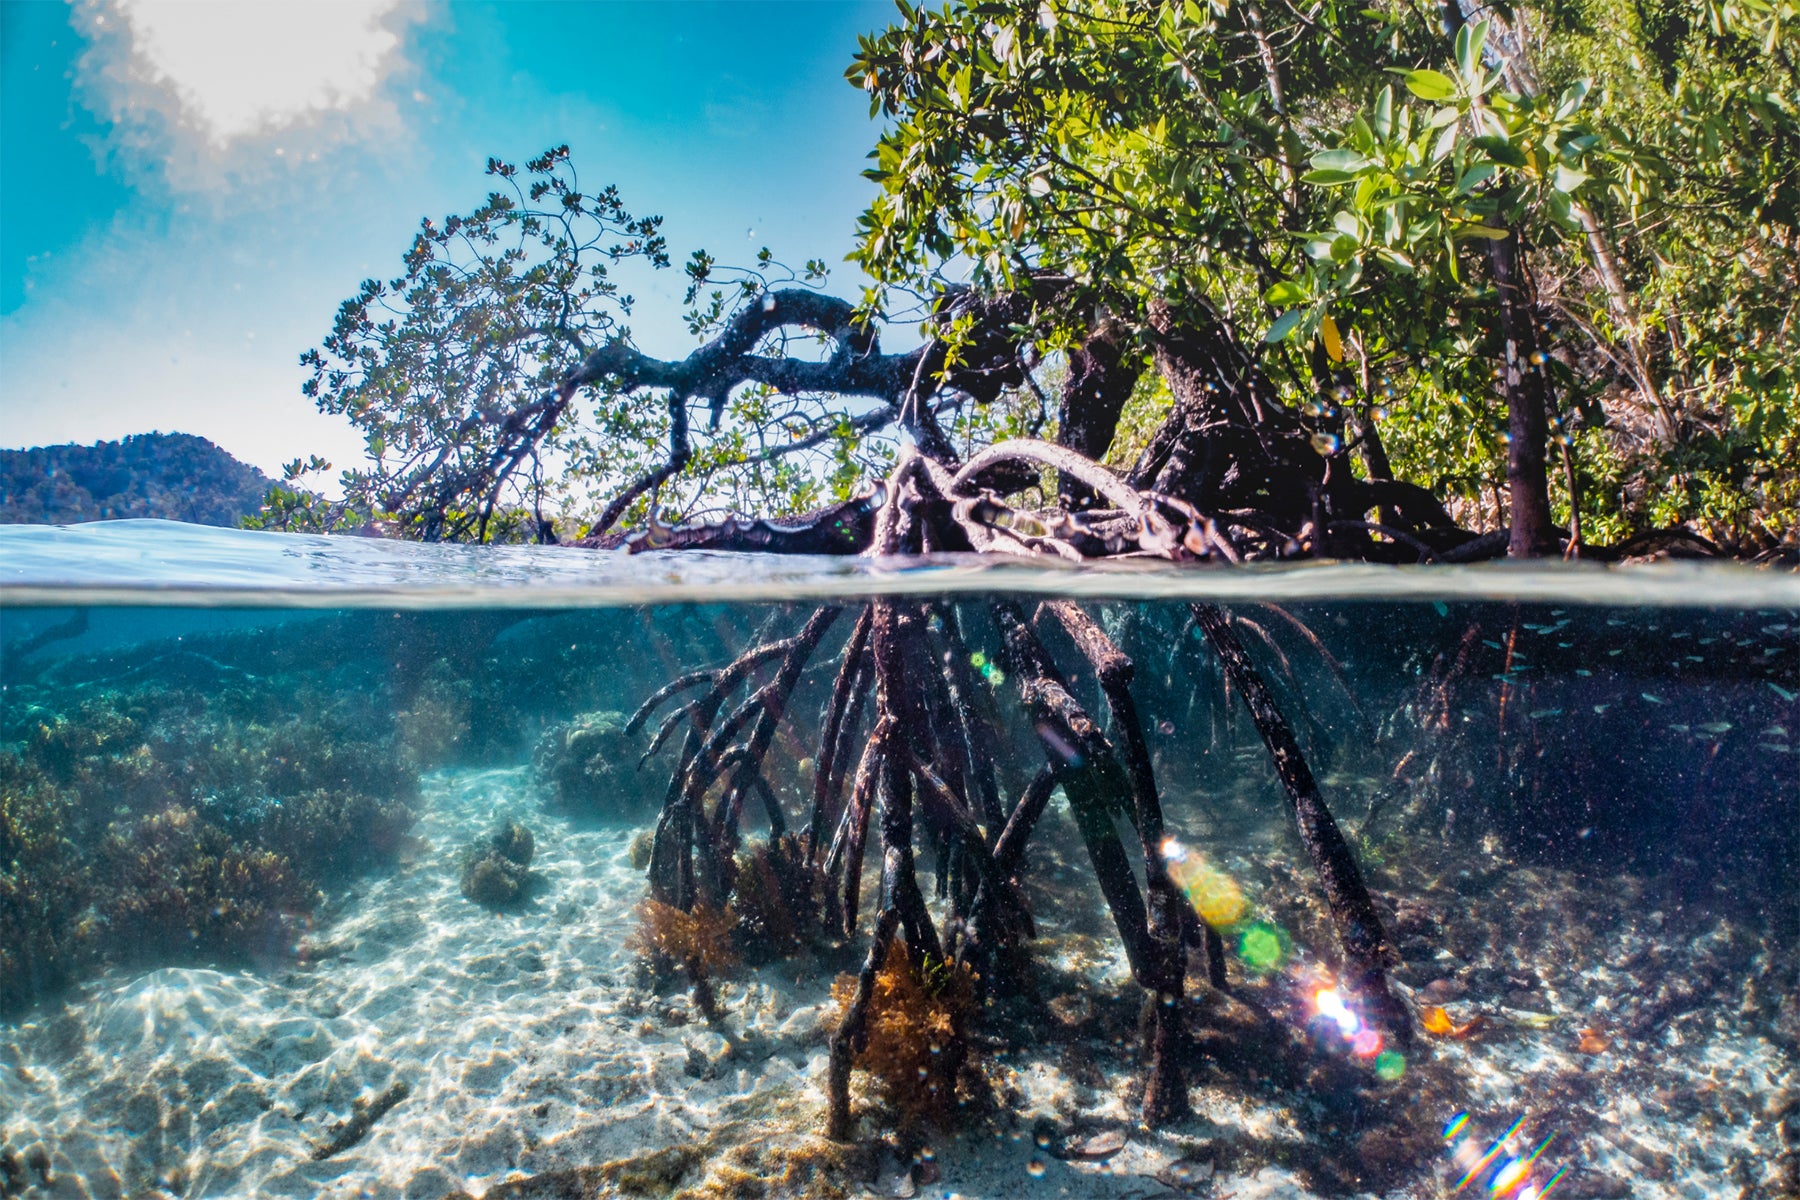 epic mangrove over under water